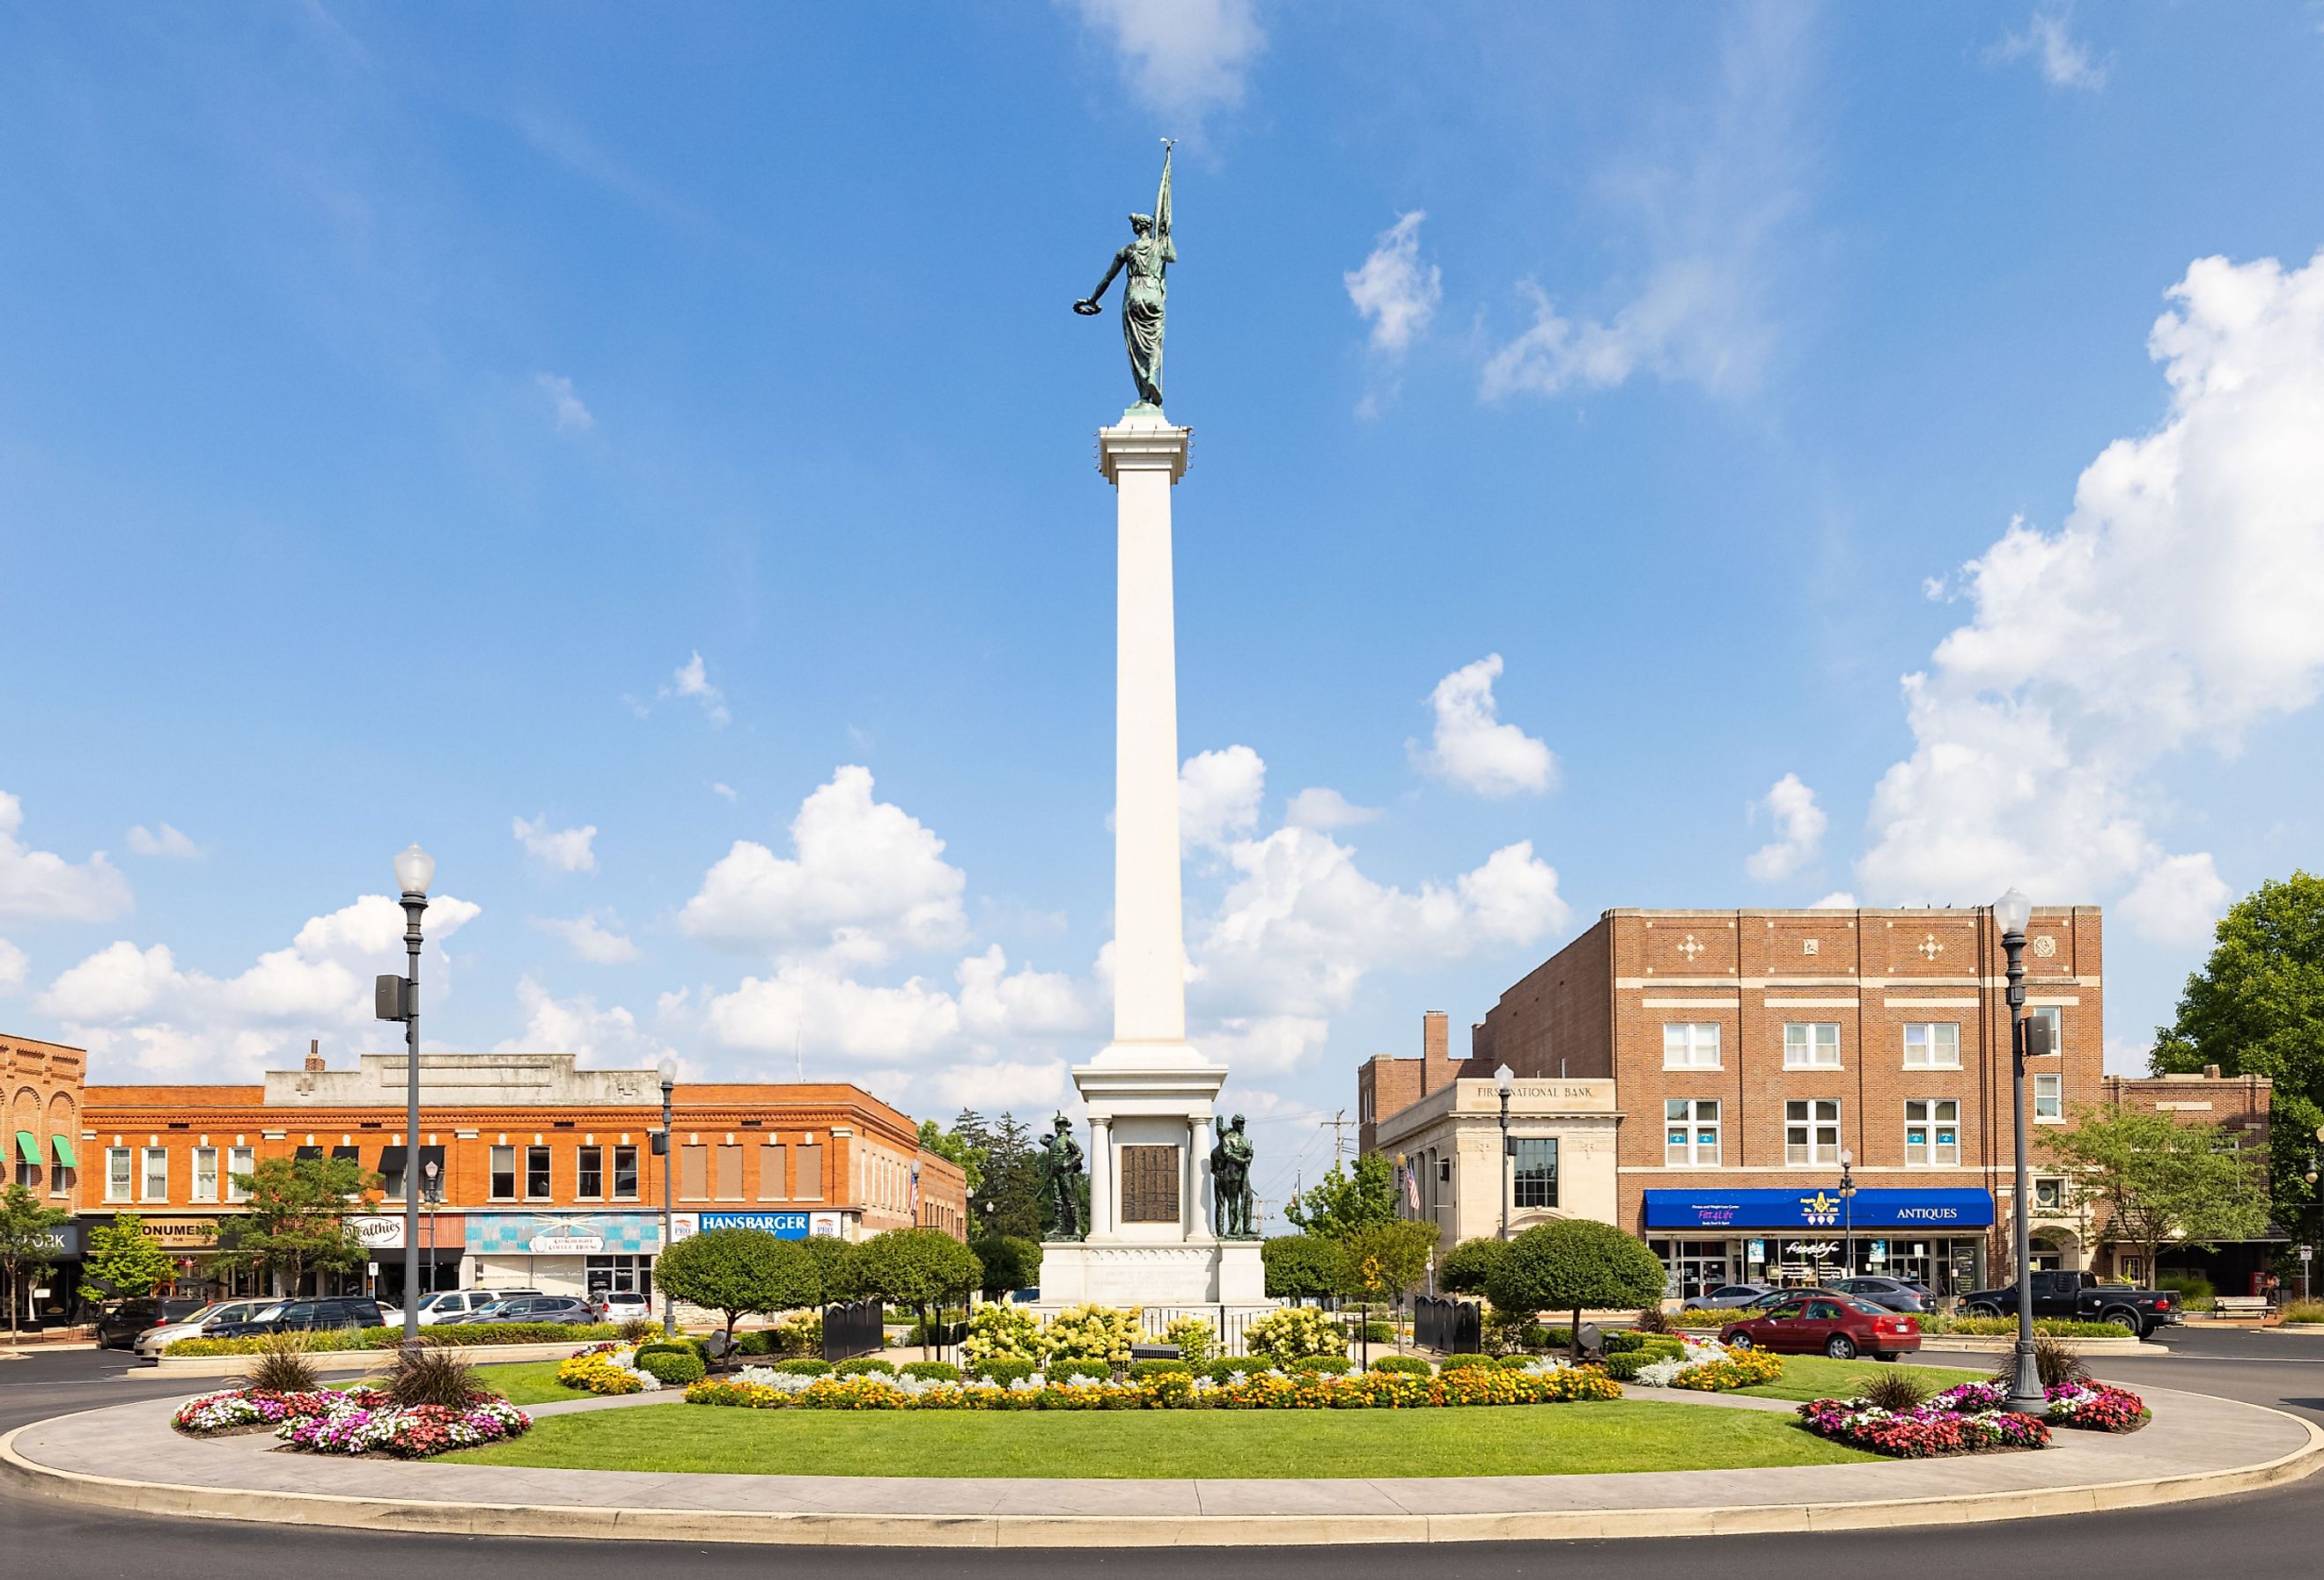 Angola, Indiana, the Steuben County Soldiers Monument in downtown, with the old business district buildings. Image credit Roberto Galan via Shutterstock